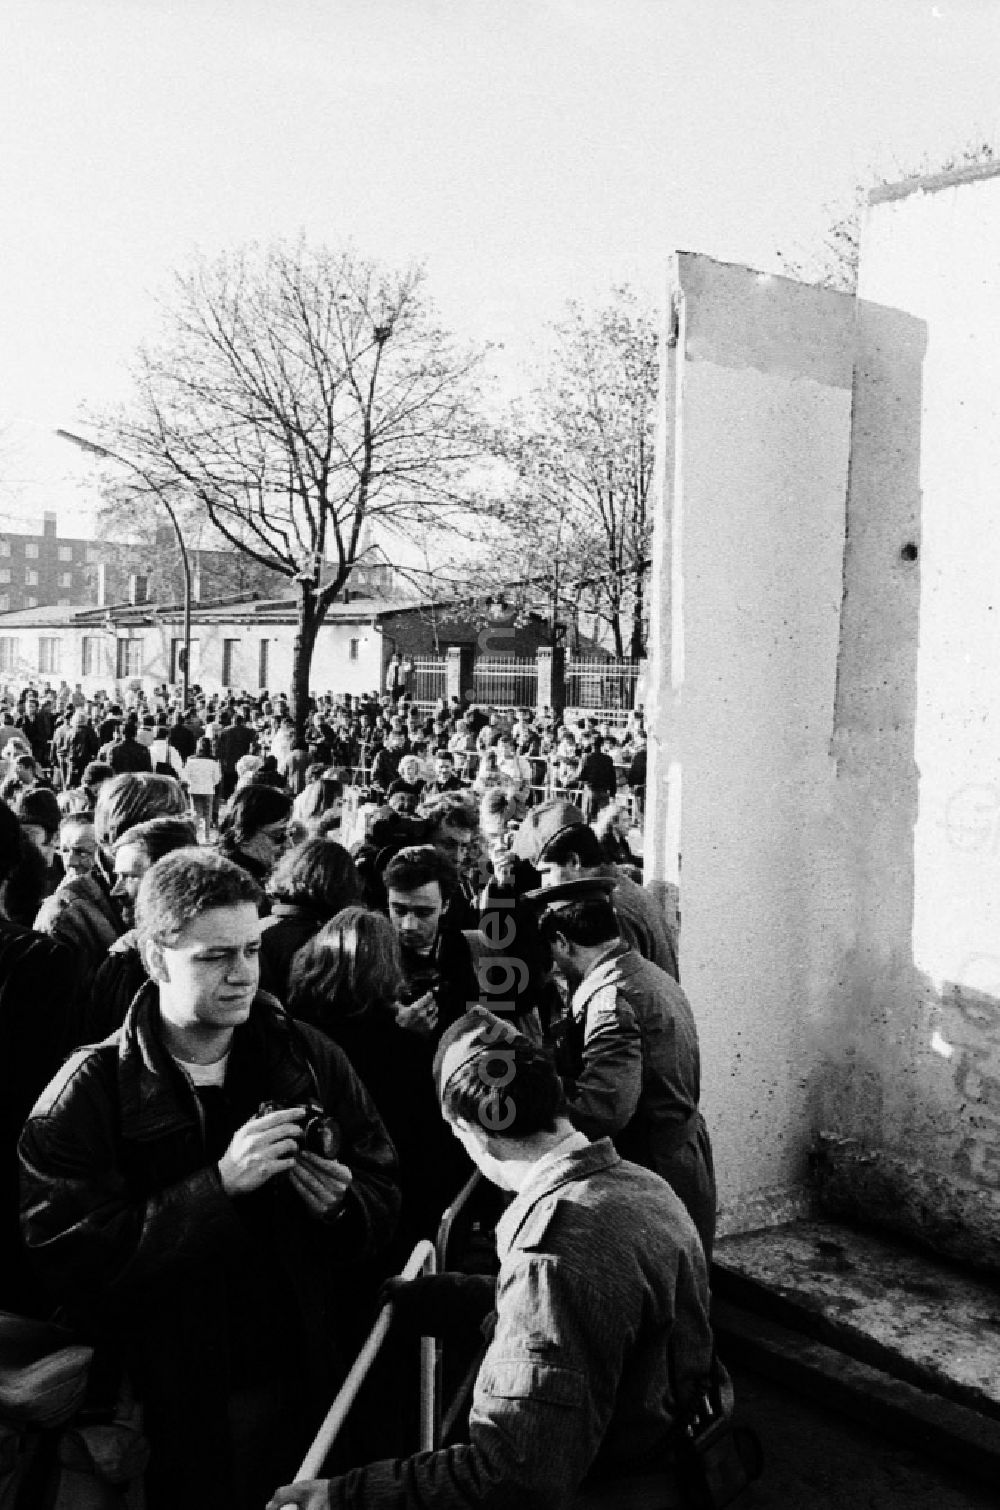 Berlin: Opening of a Grenzübergangesan Bernauer Strasse after the fall of the Berlin Wall in East Germany